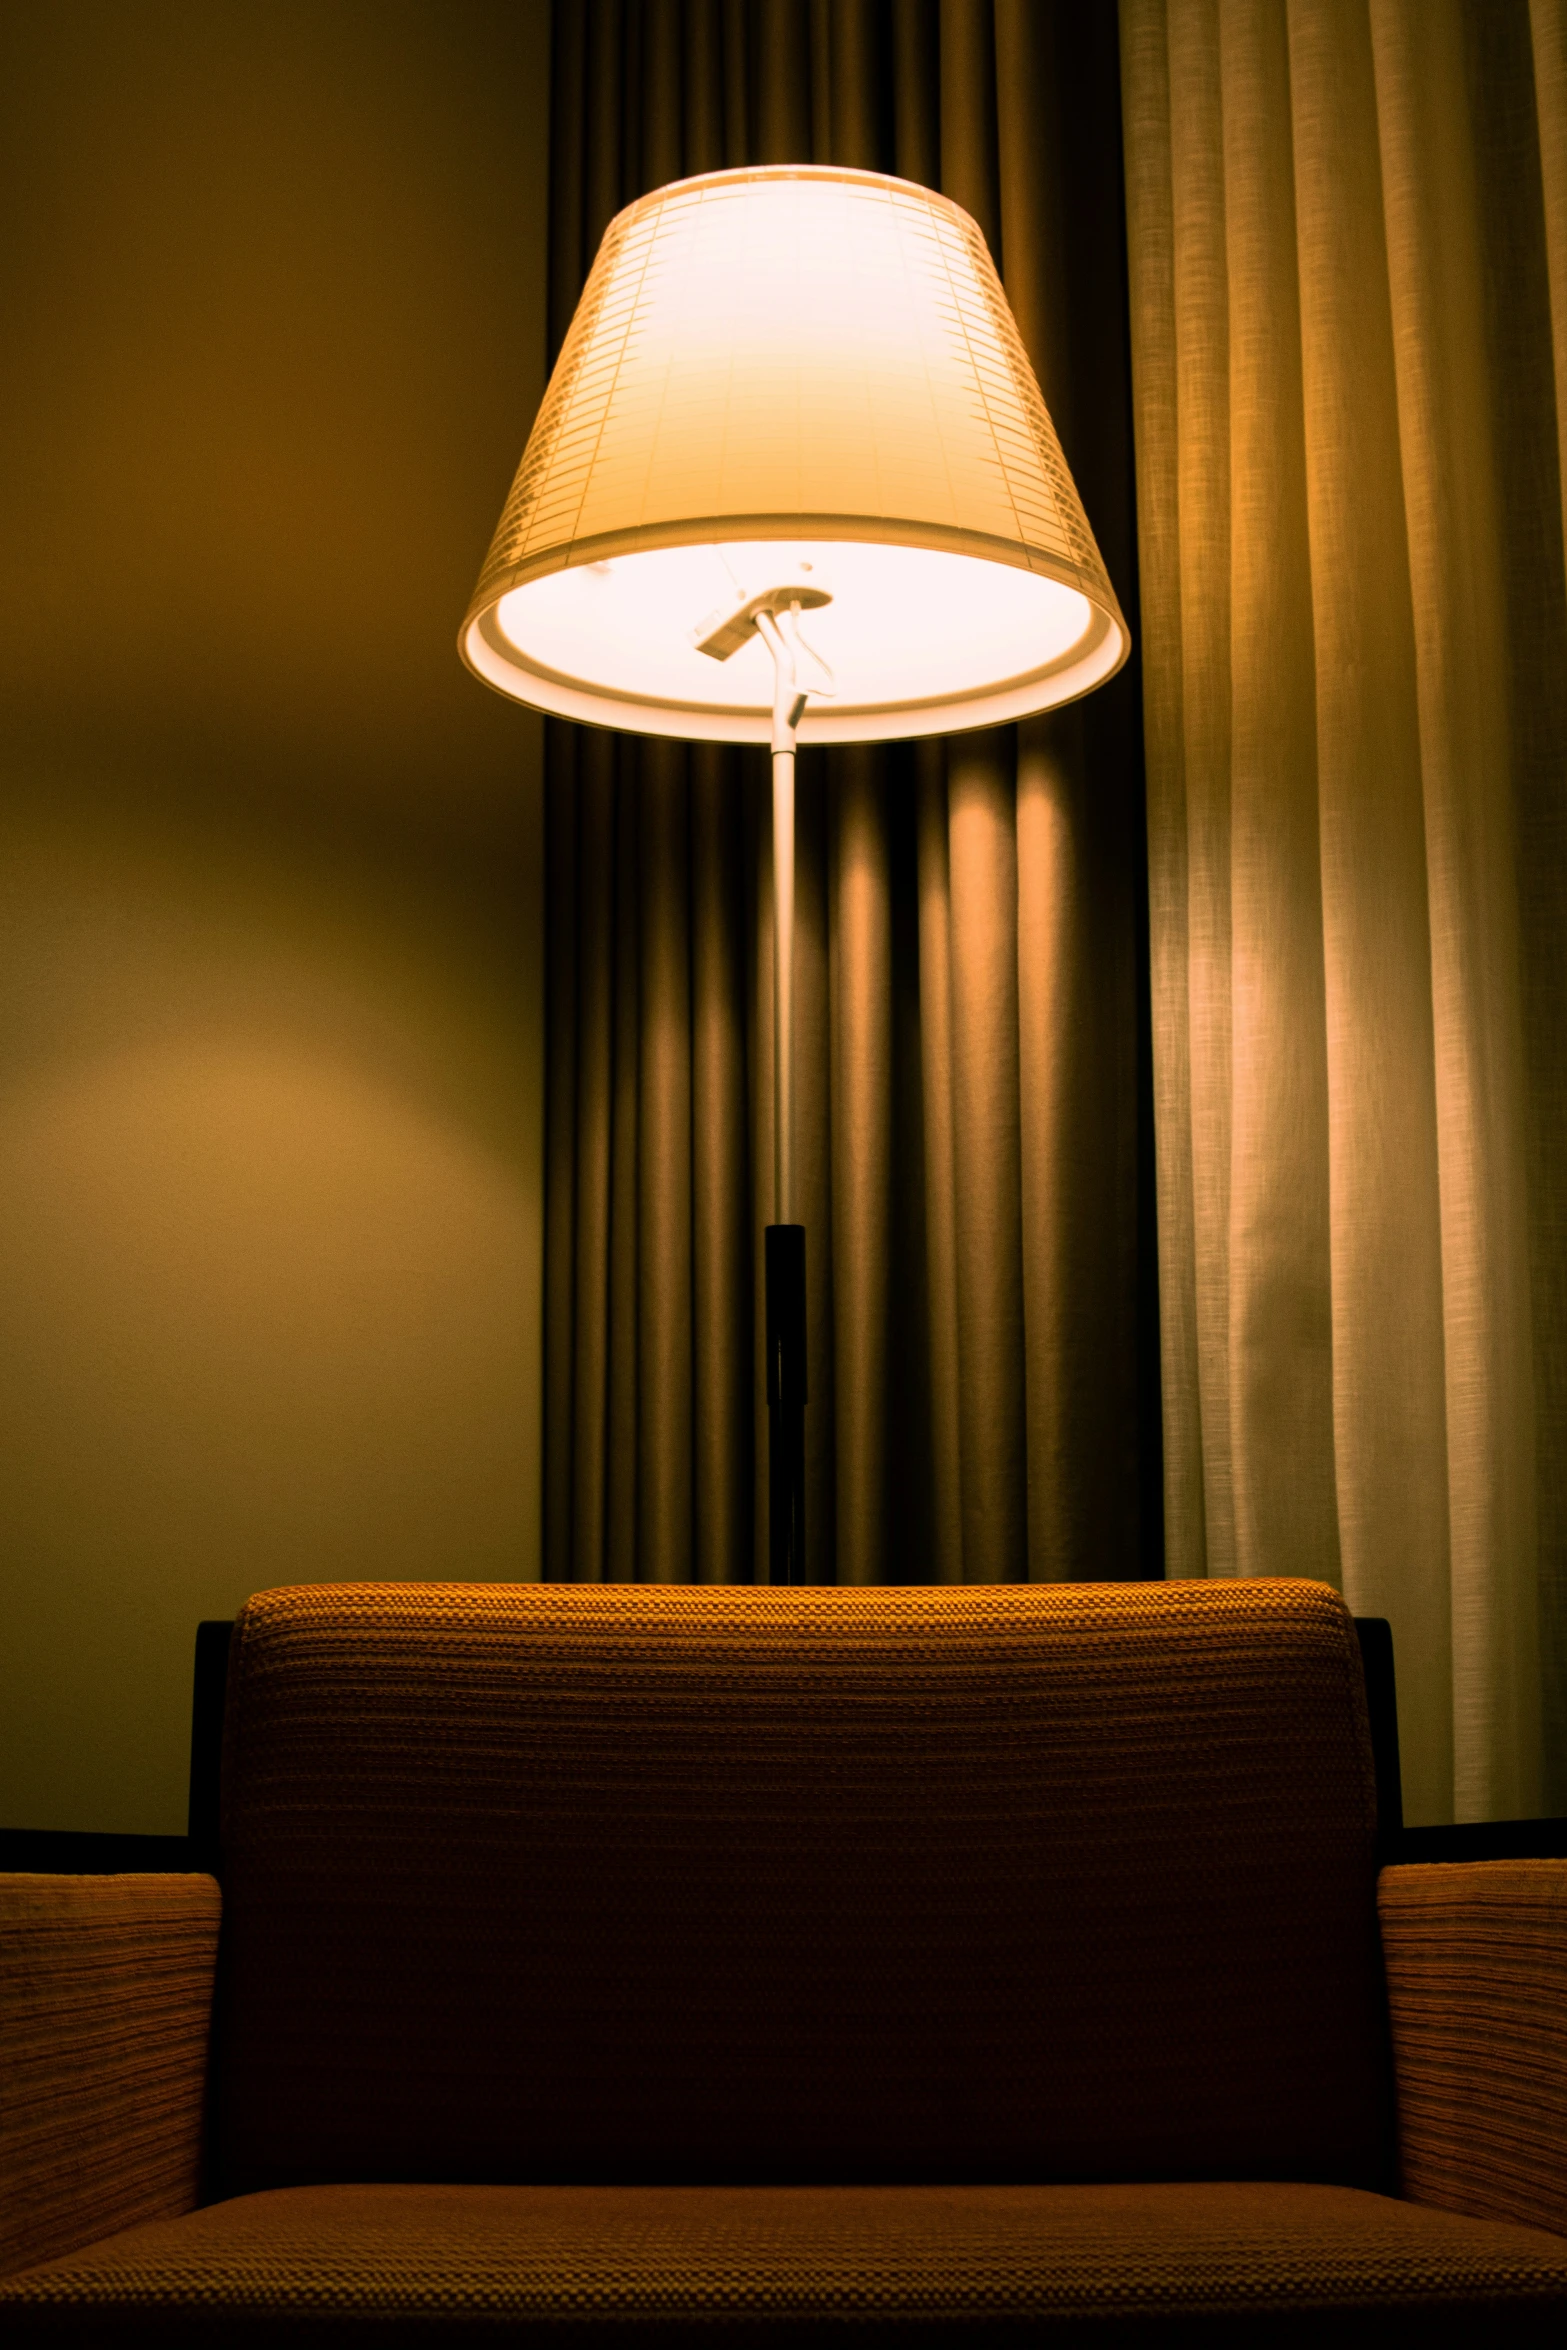 a light sitting on top of a table next to a lamp